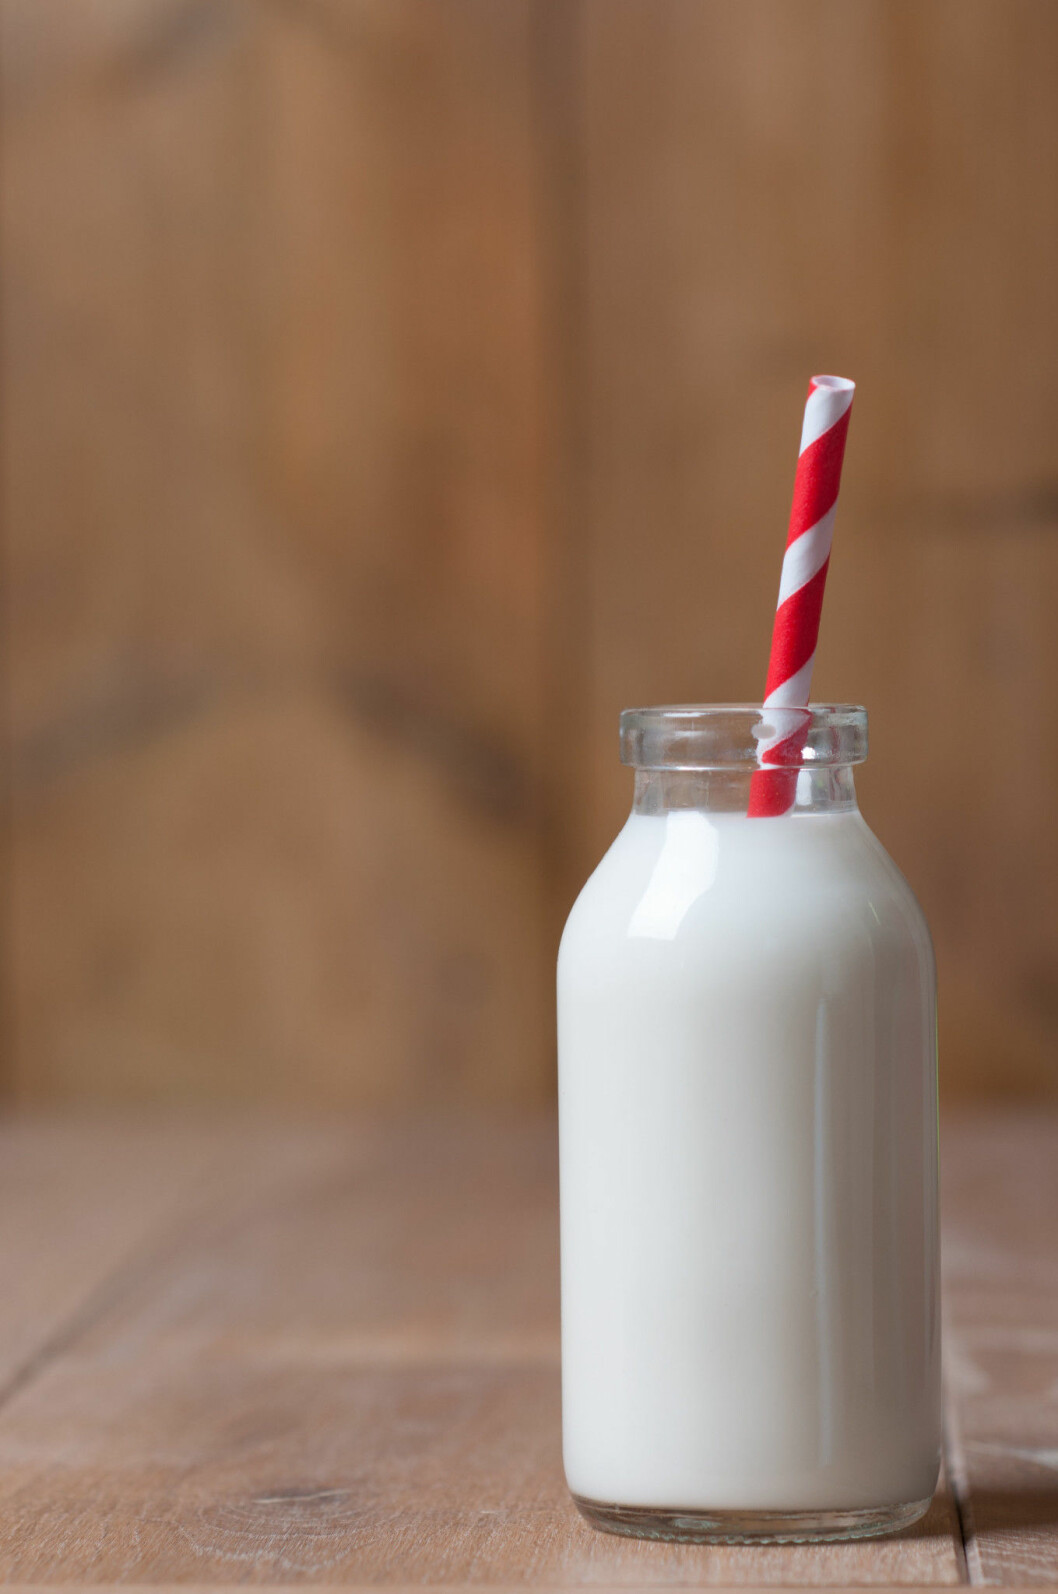 Single bottle of milk with red striped drinking straw in rustic setting